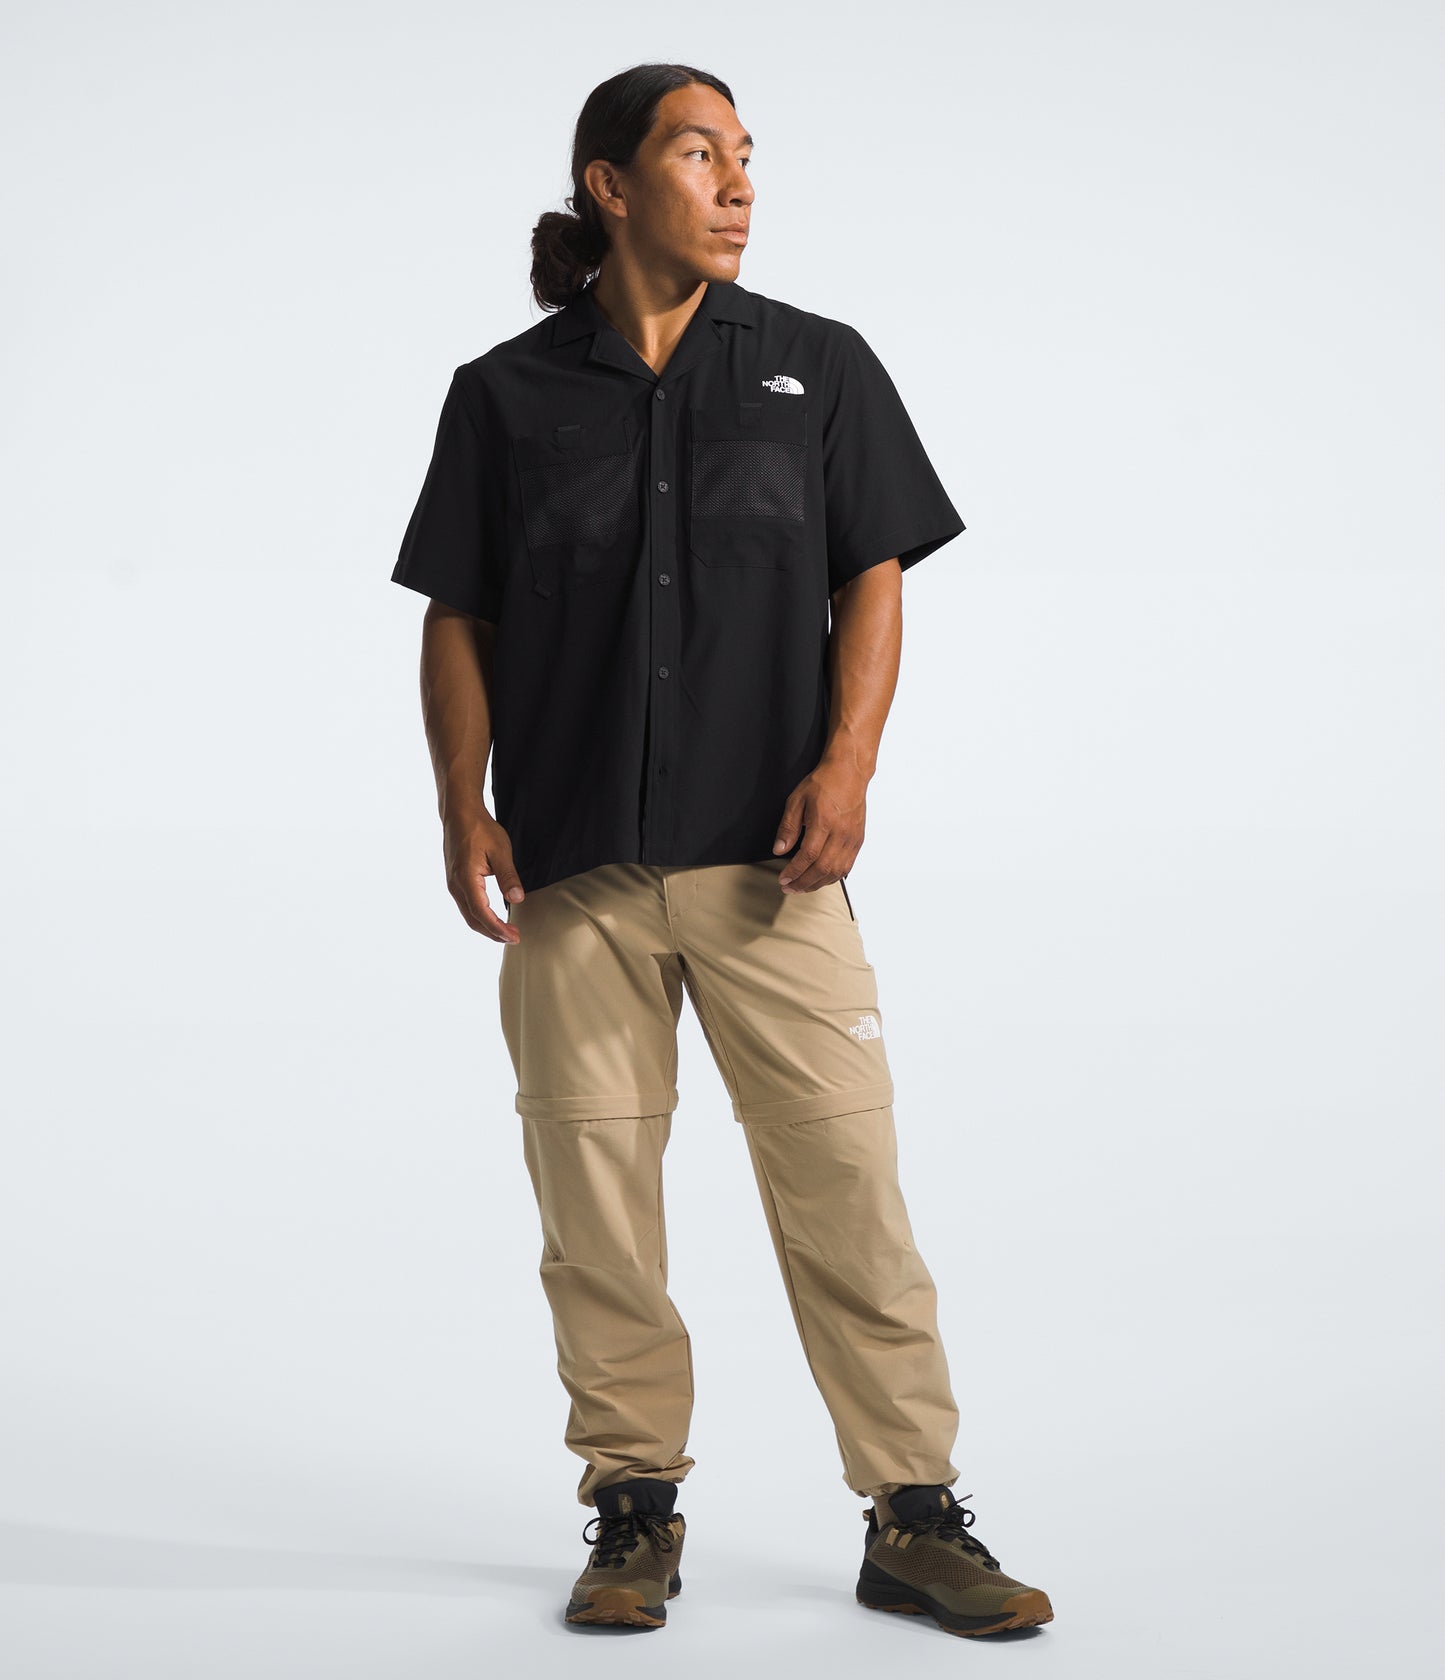 m tops - THE NORTH FACE - Face First Trail Short Sleeve Shirt - PLENTY